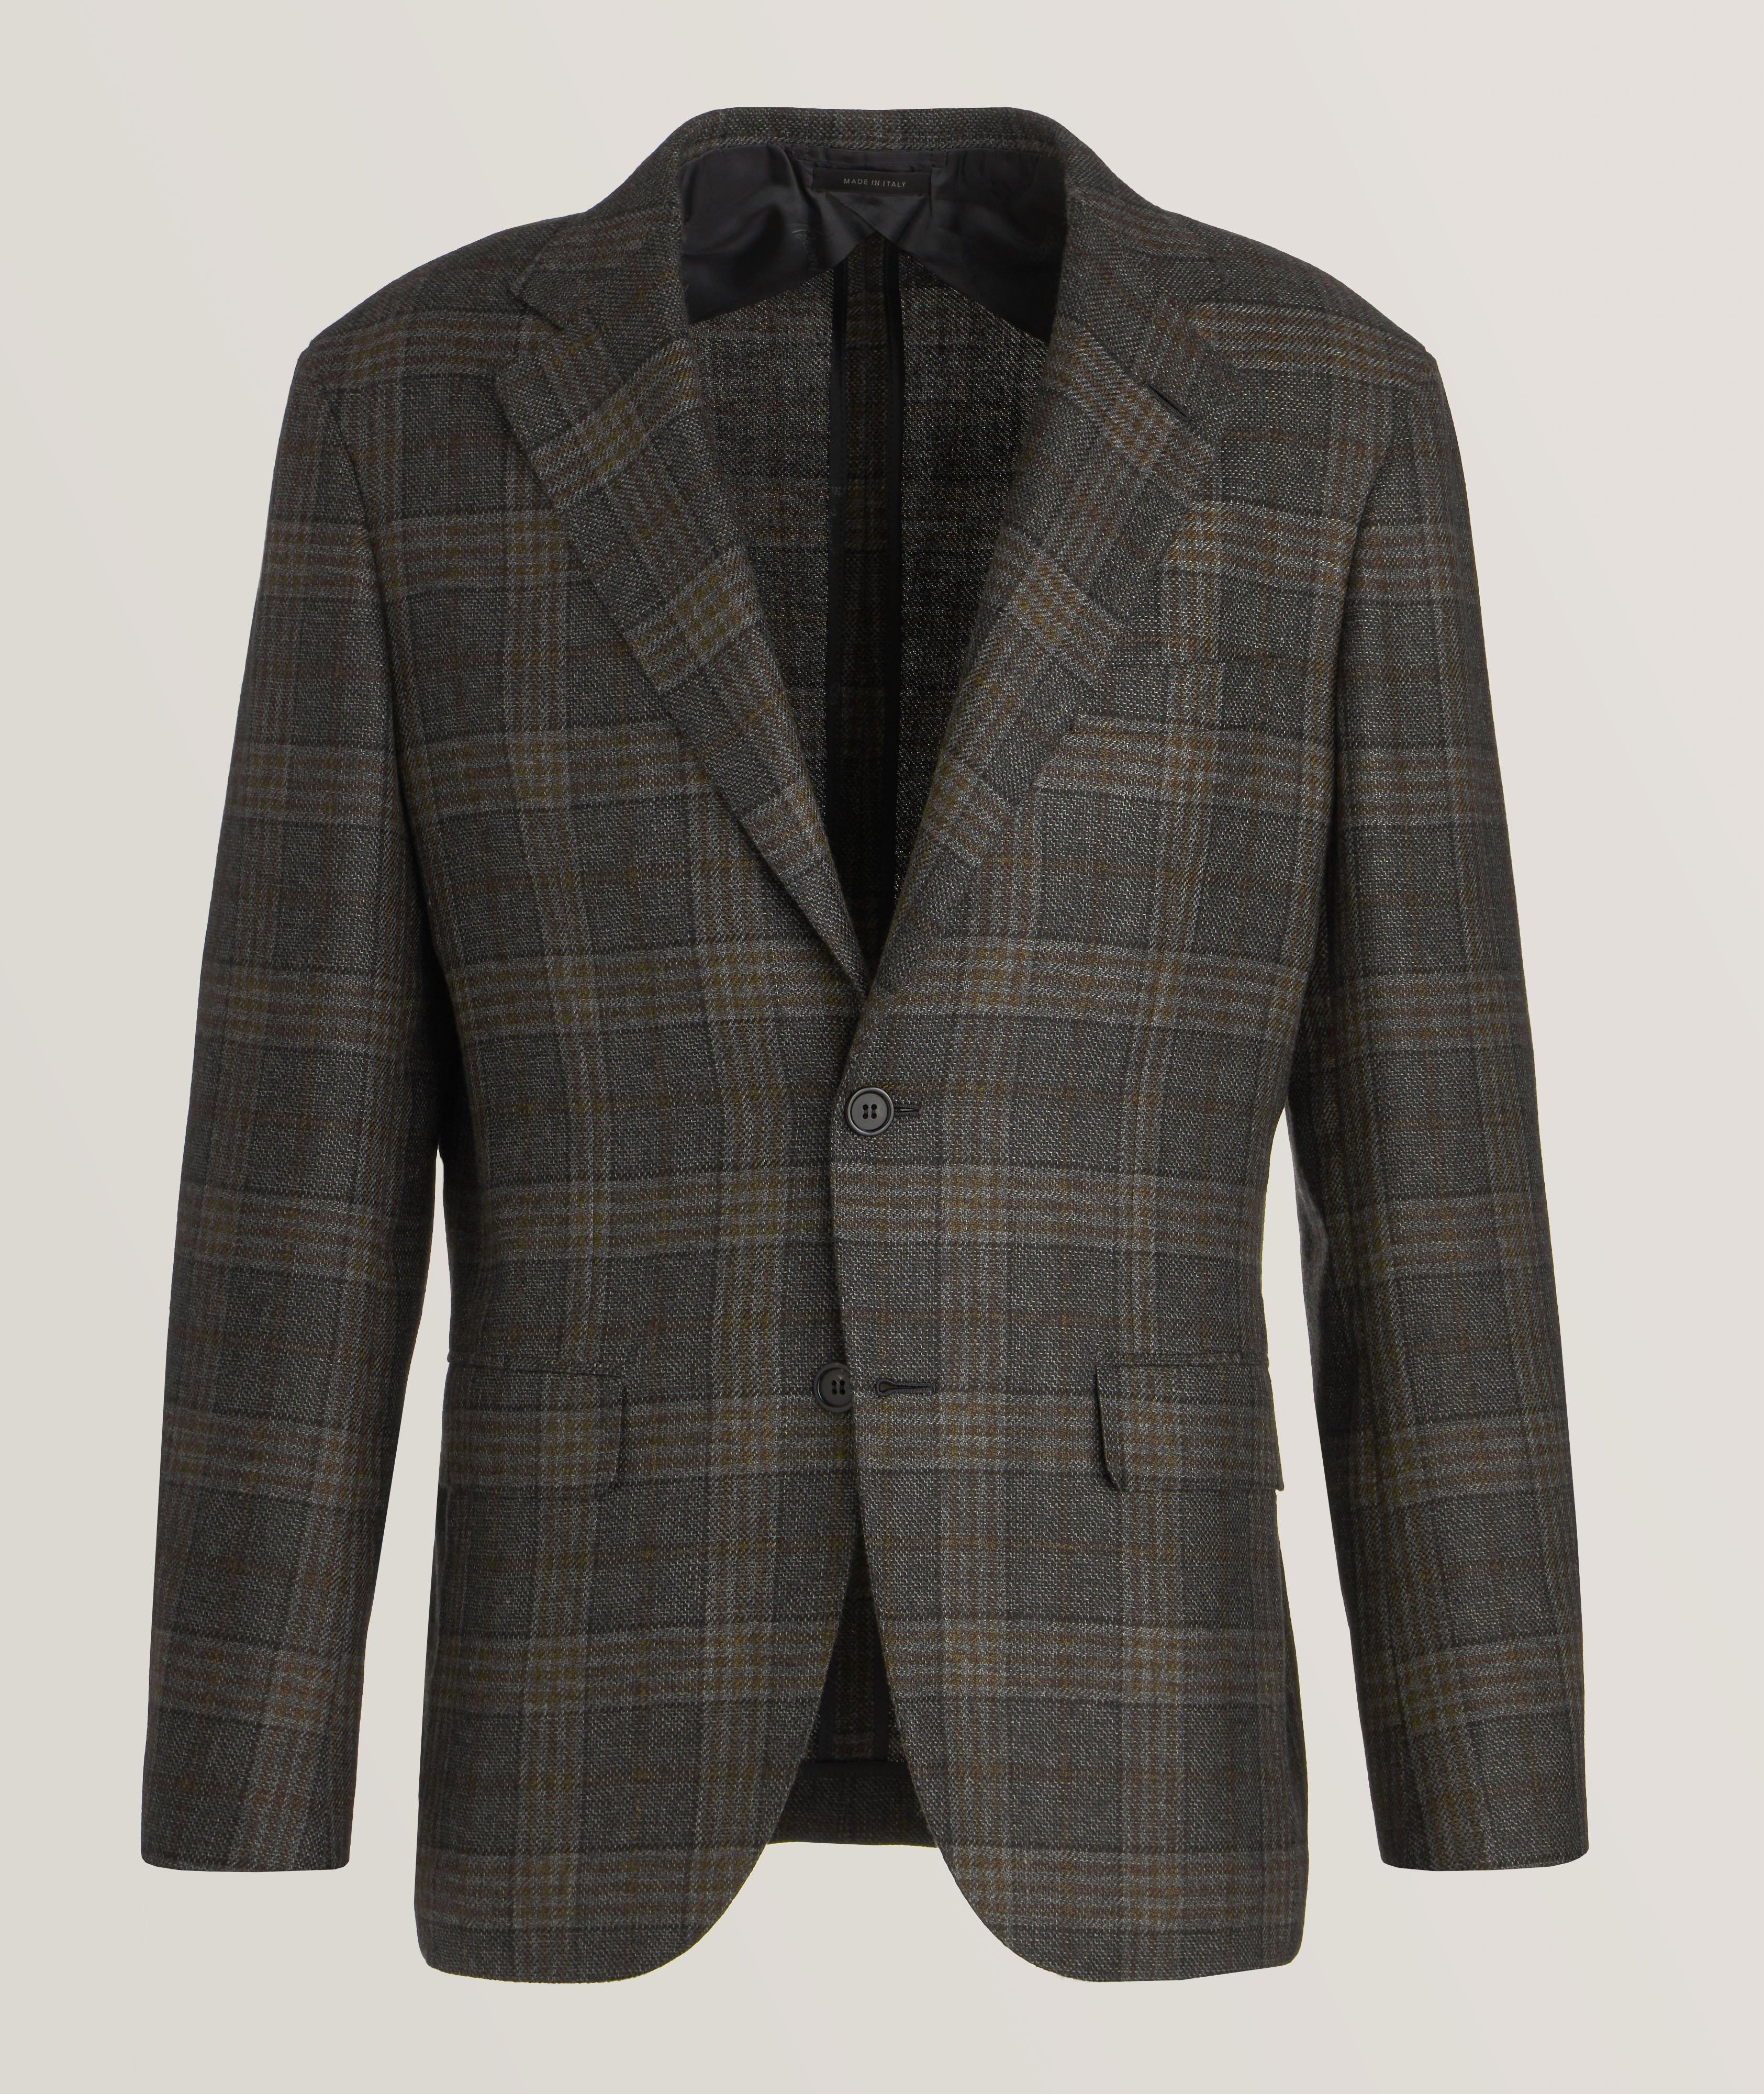 New Plume Prince of Wales Cashmere Sport Jacket image 0